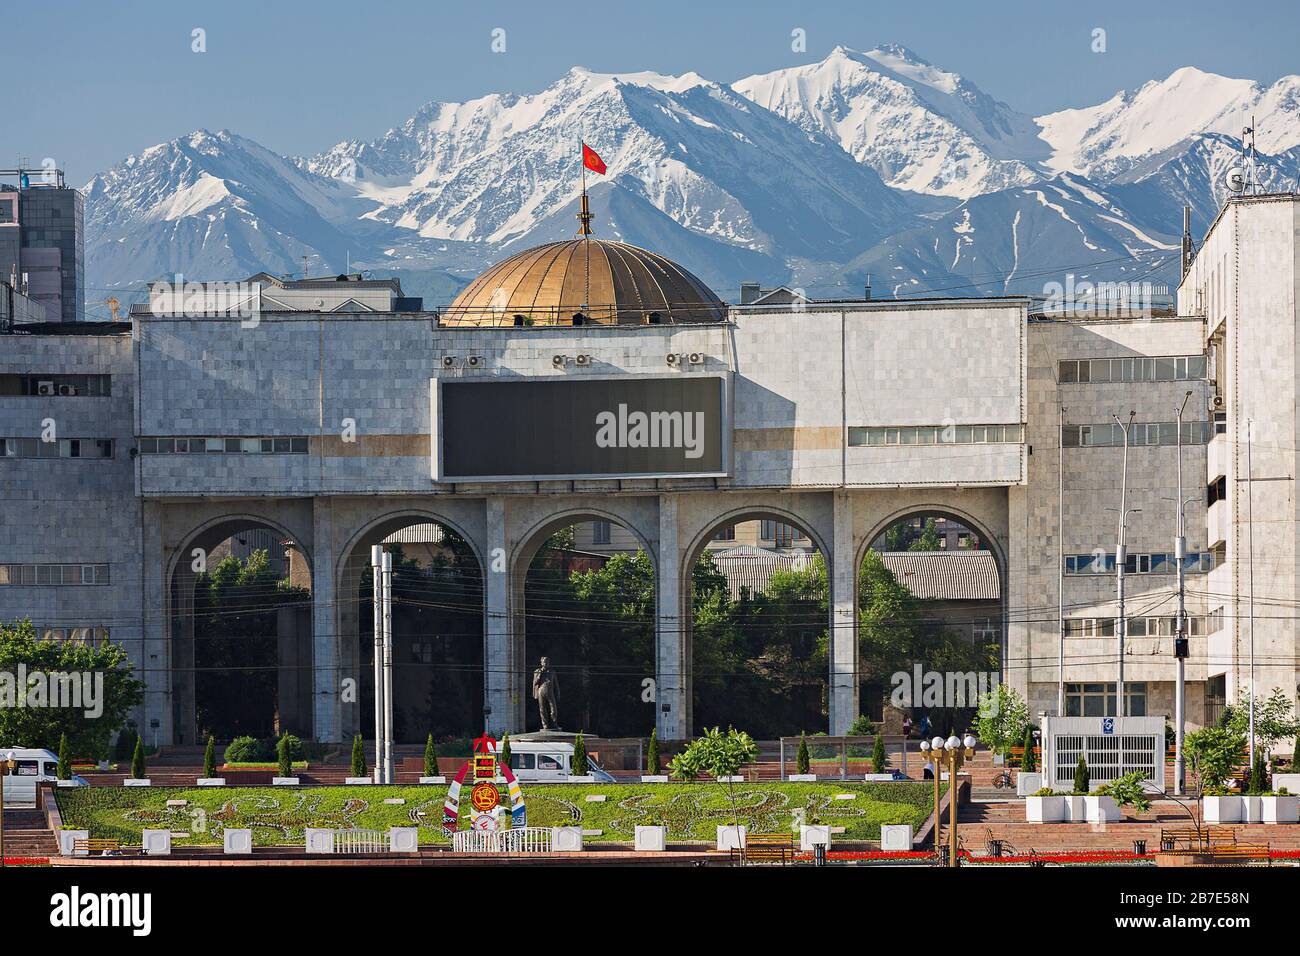 View over the city centre in Alatau Square of Bishkek with snow capped mountains in the background Stock Photo